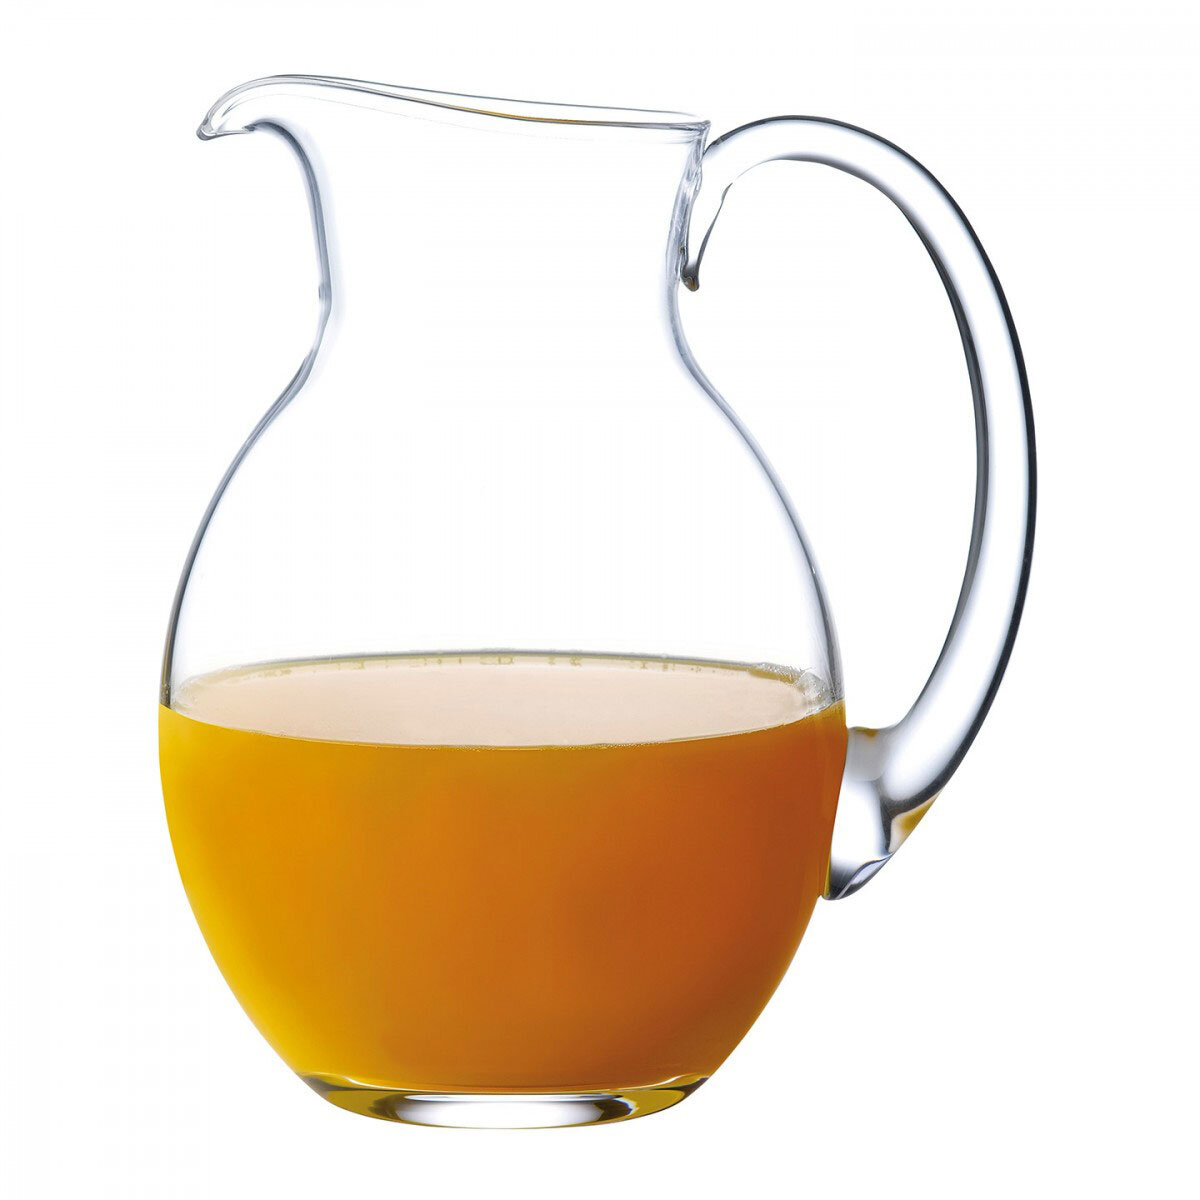 Marquis by Waterford Moments 50.7 oz. Pitcher